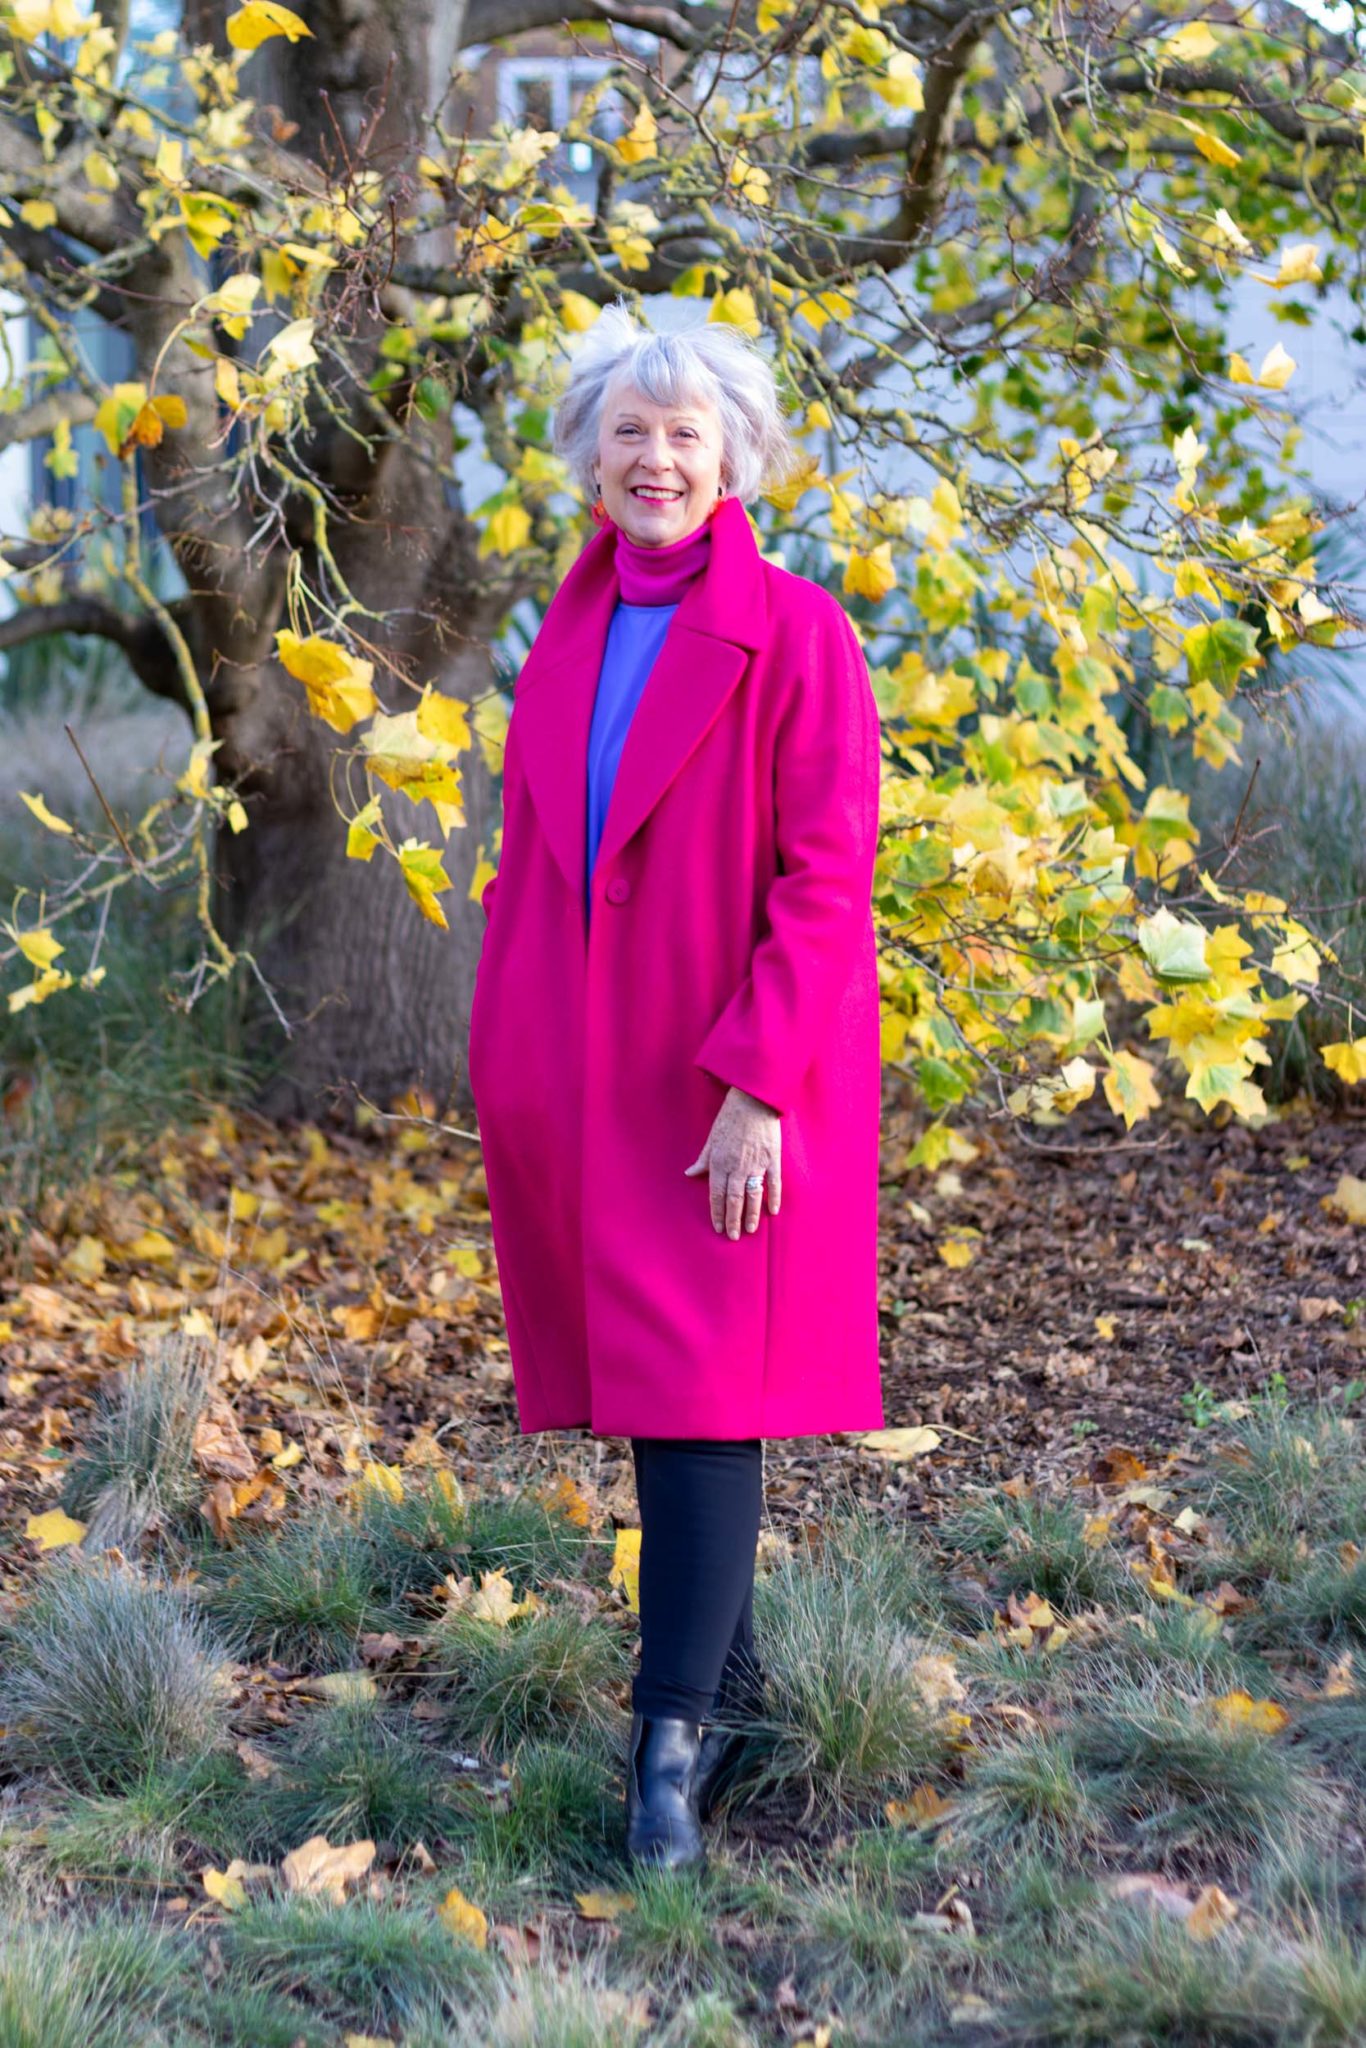 How to wear bright colours during the winter months - Chic at any age